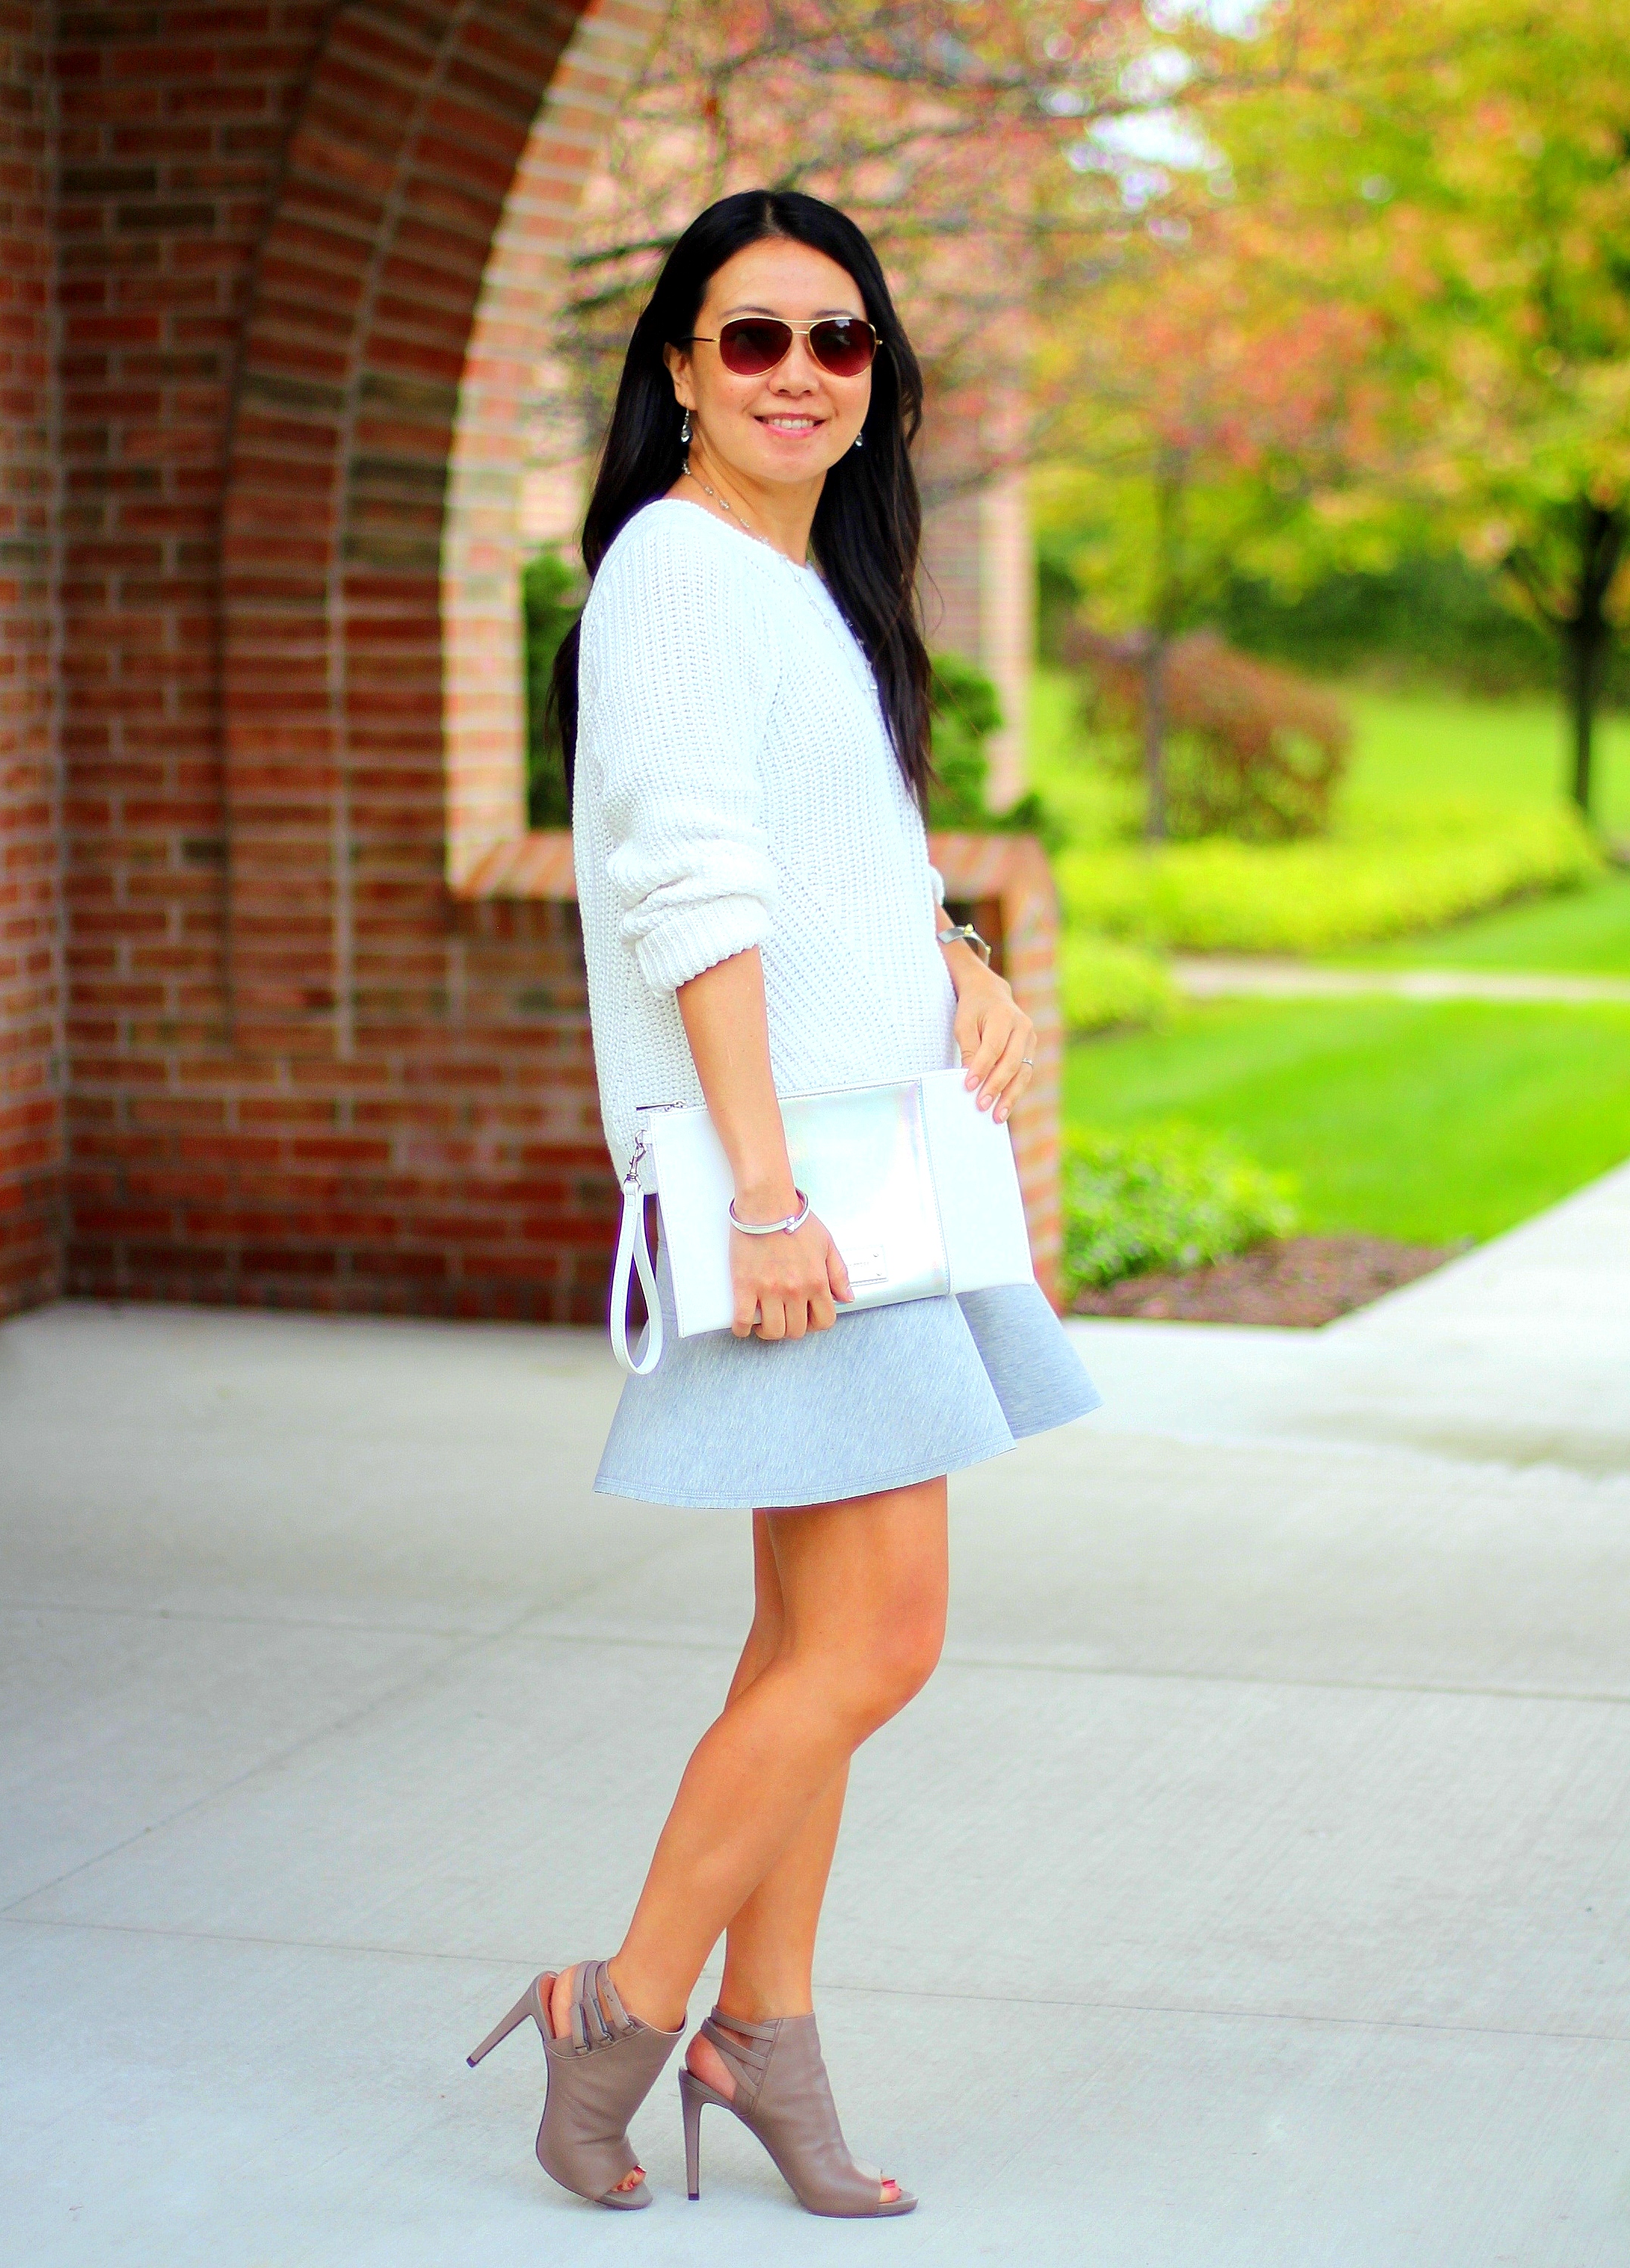 Outfit Highlight: Fun with Neutrals - My Rose Colored Shades